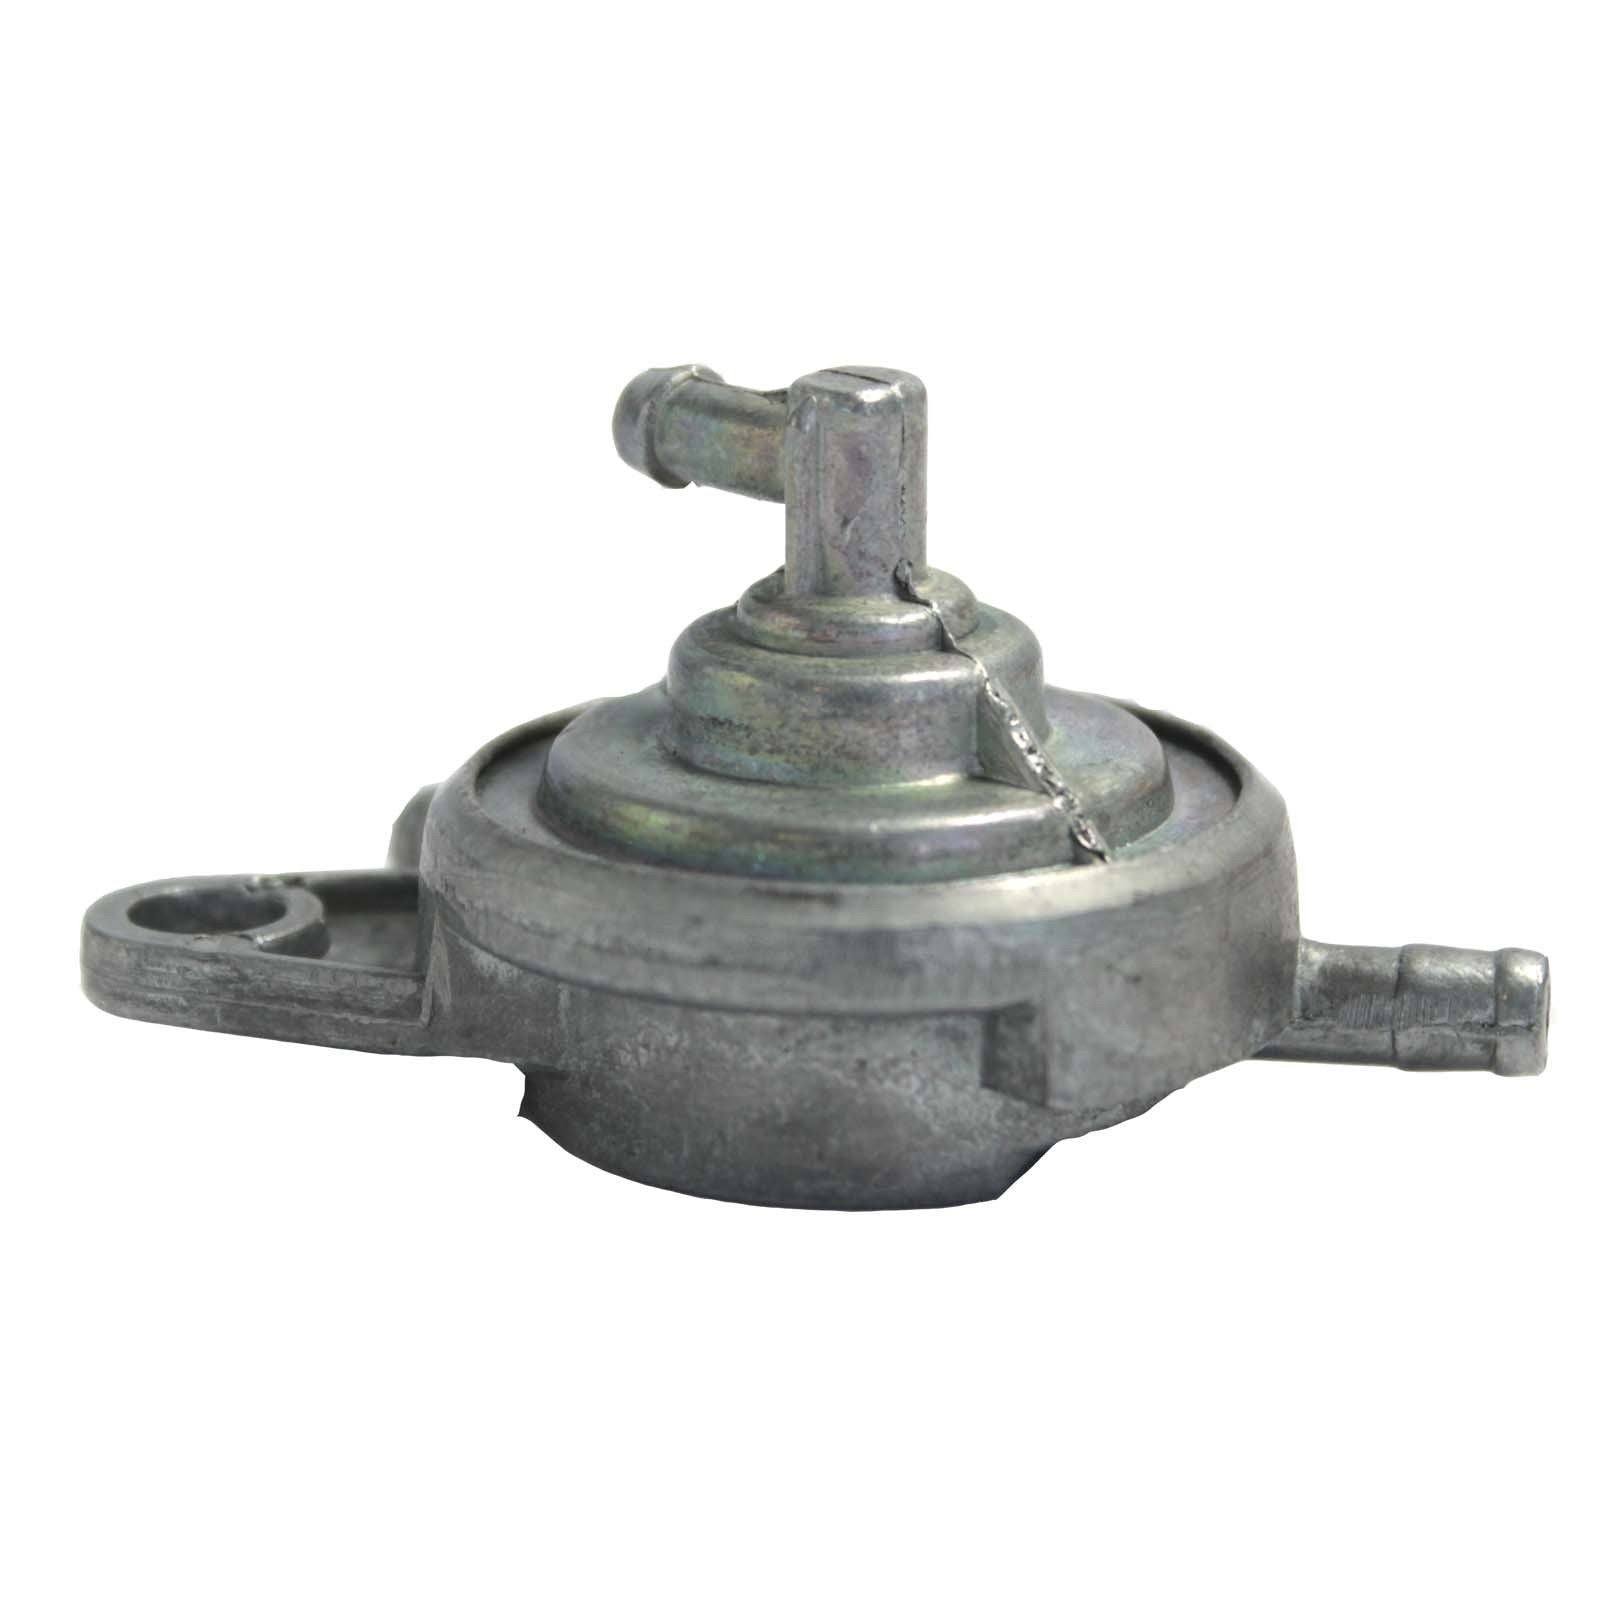 Vacuum Fuel Gas Pump Valve Petcock Switch For GY6 125cc 150cc Moped Scooter ATV - TDRMOTO